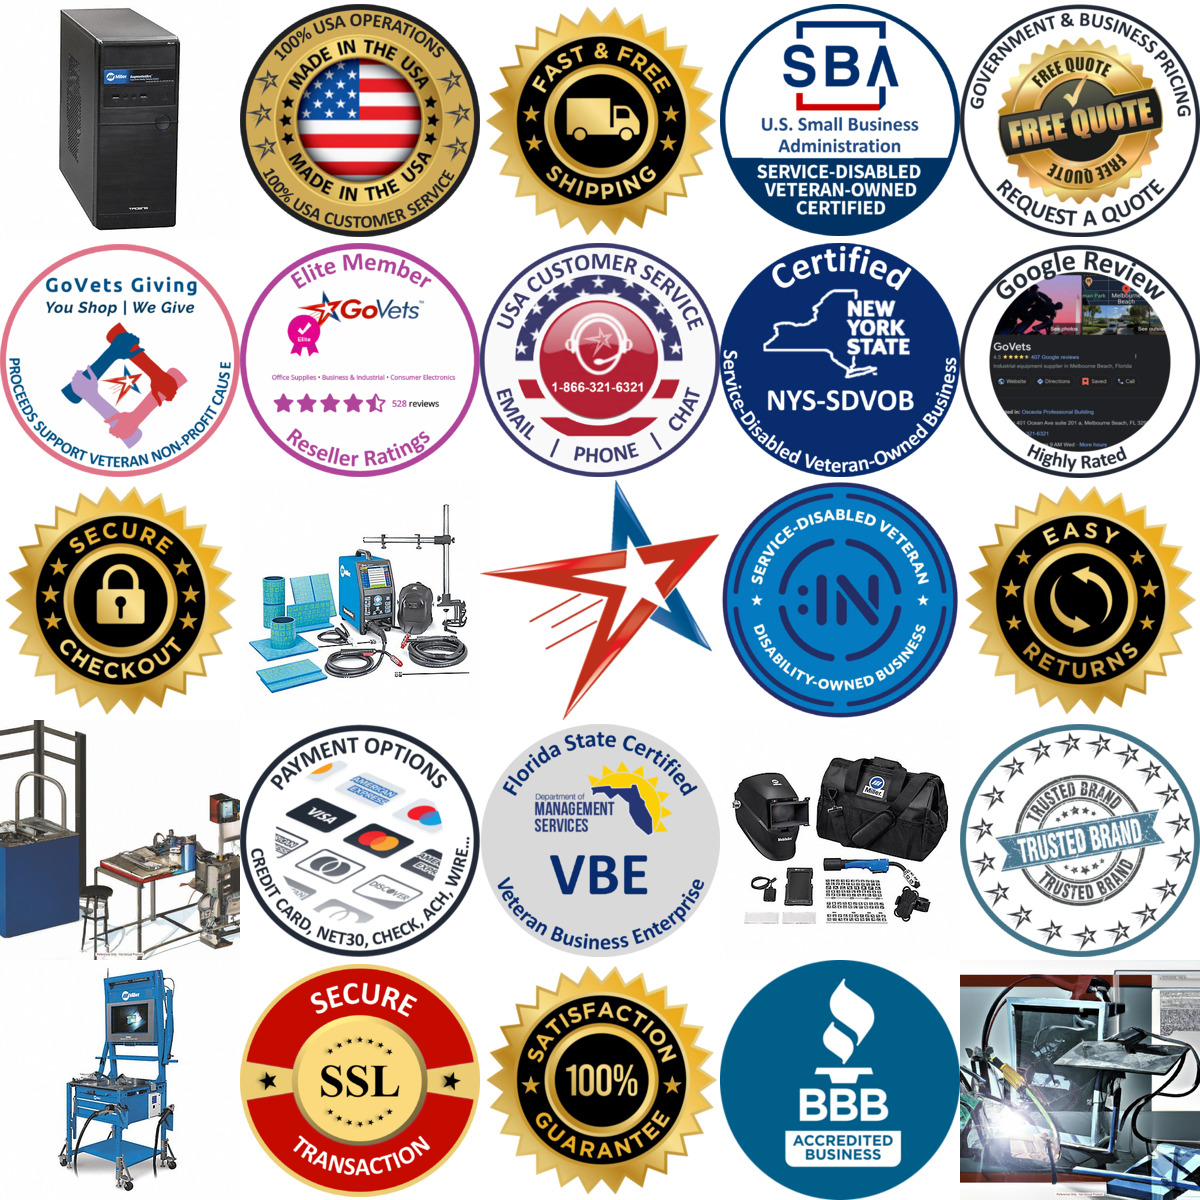 A selection of Welding Training Systems products on GoVets